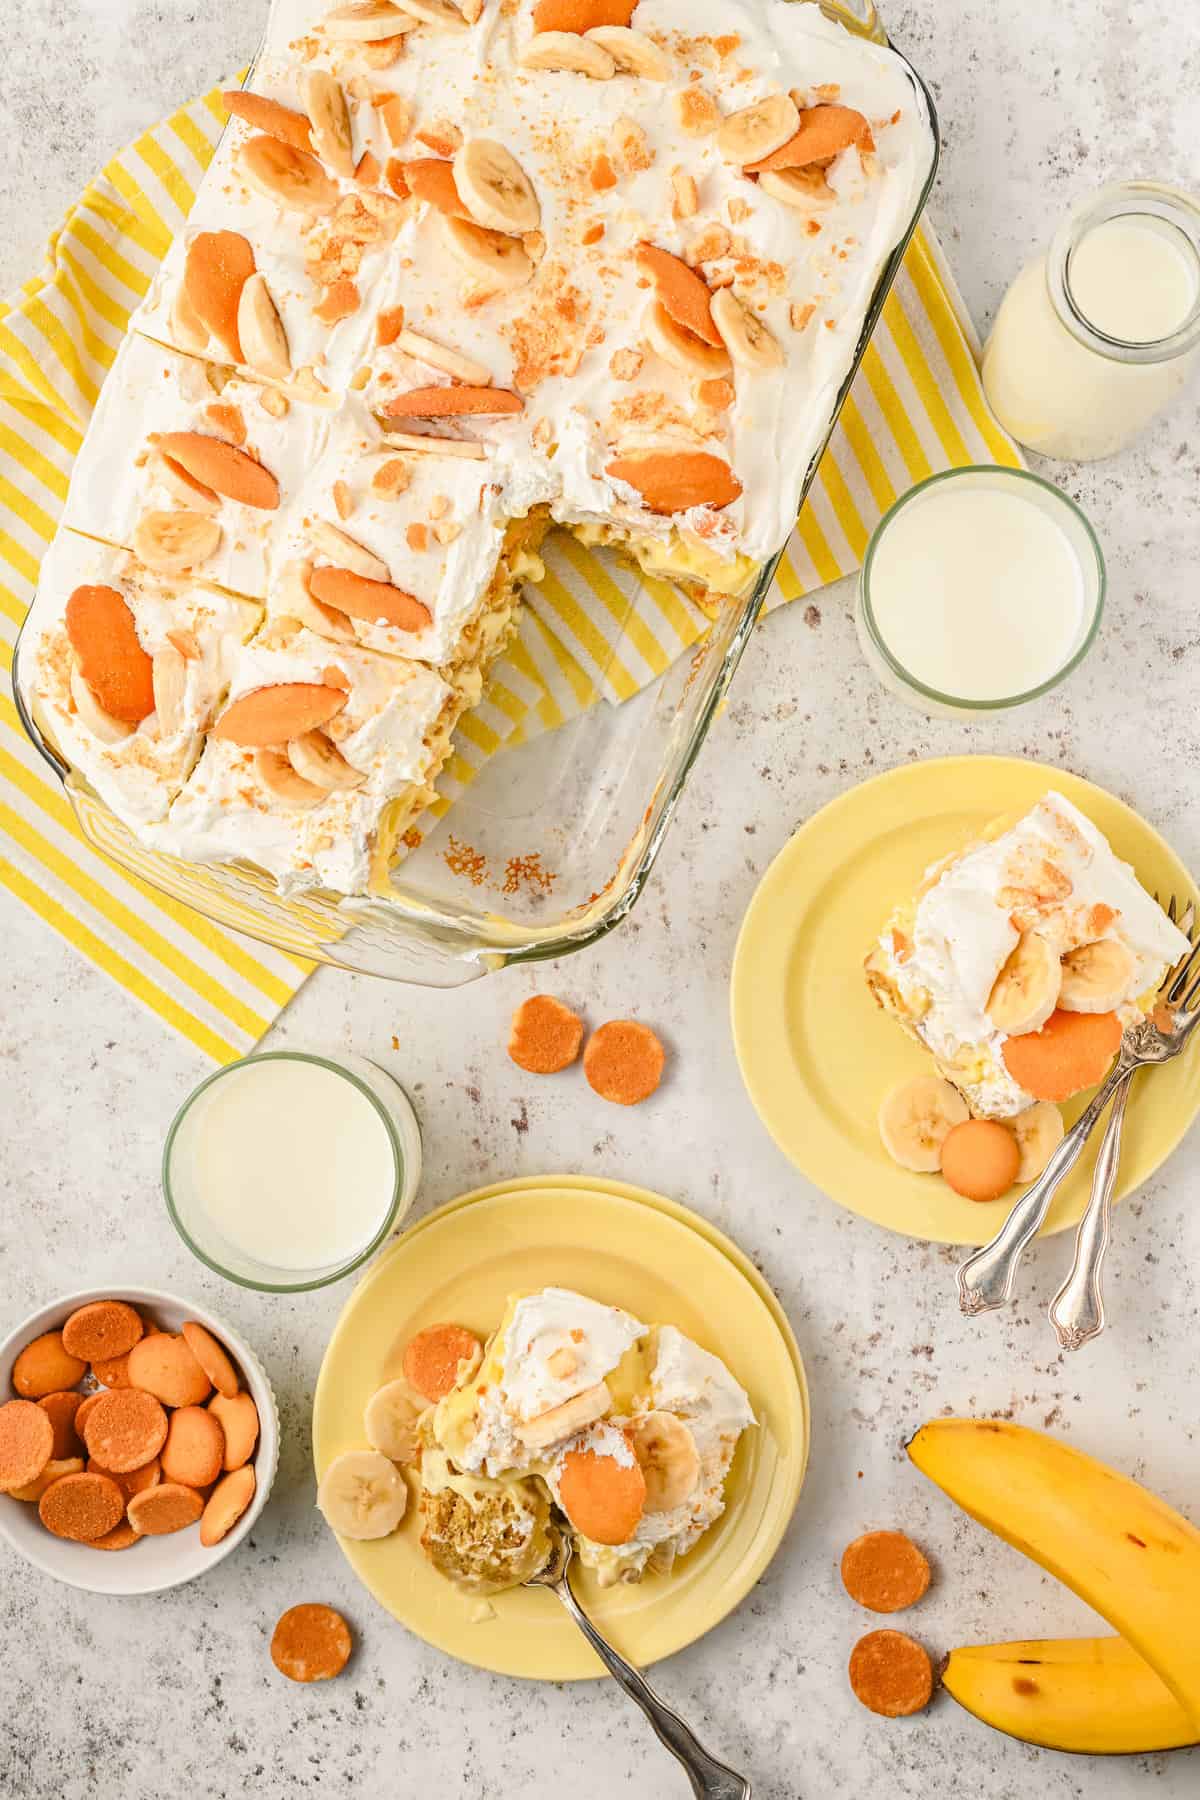 partially eaten banana poke cake in a baking dish sitting on a white and yellow striped towel on a counter with glasses of milk, slices of cake on plates, and vanilla wafers arranged around it